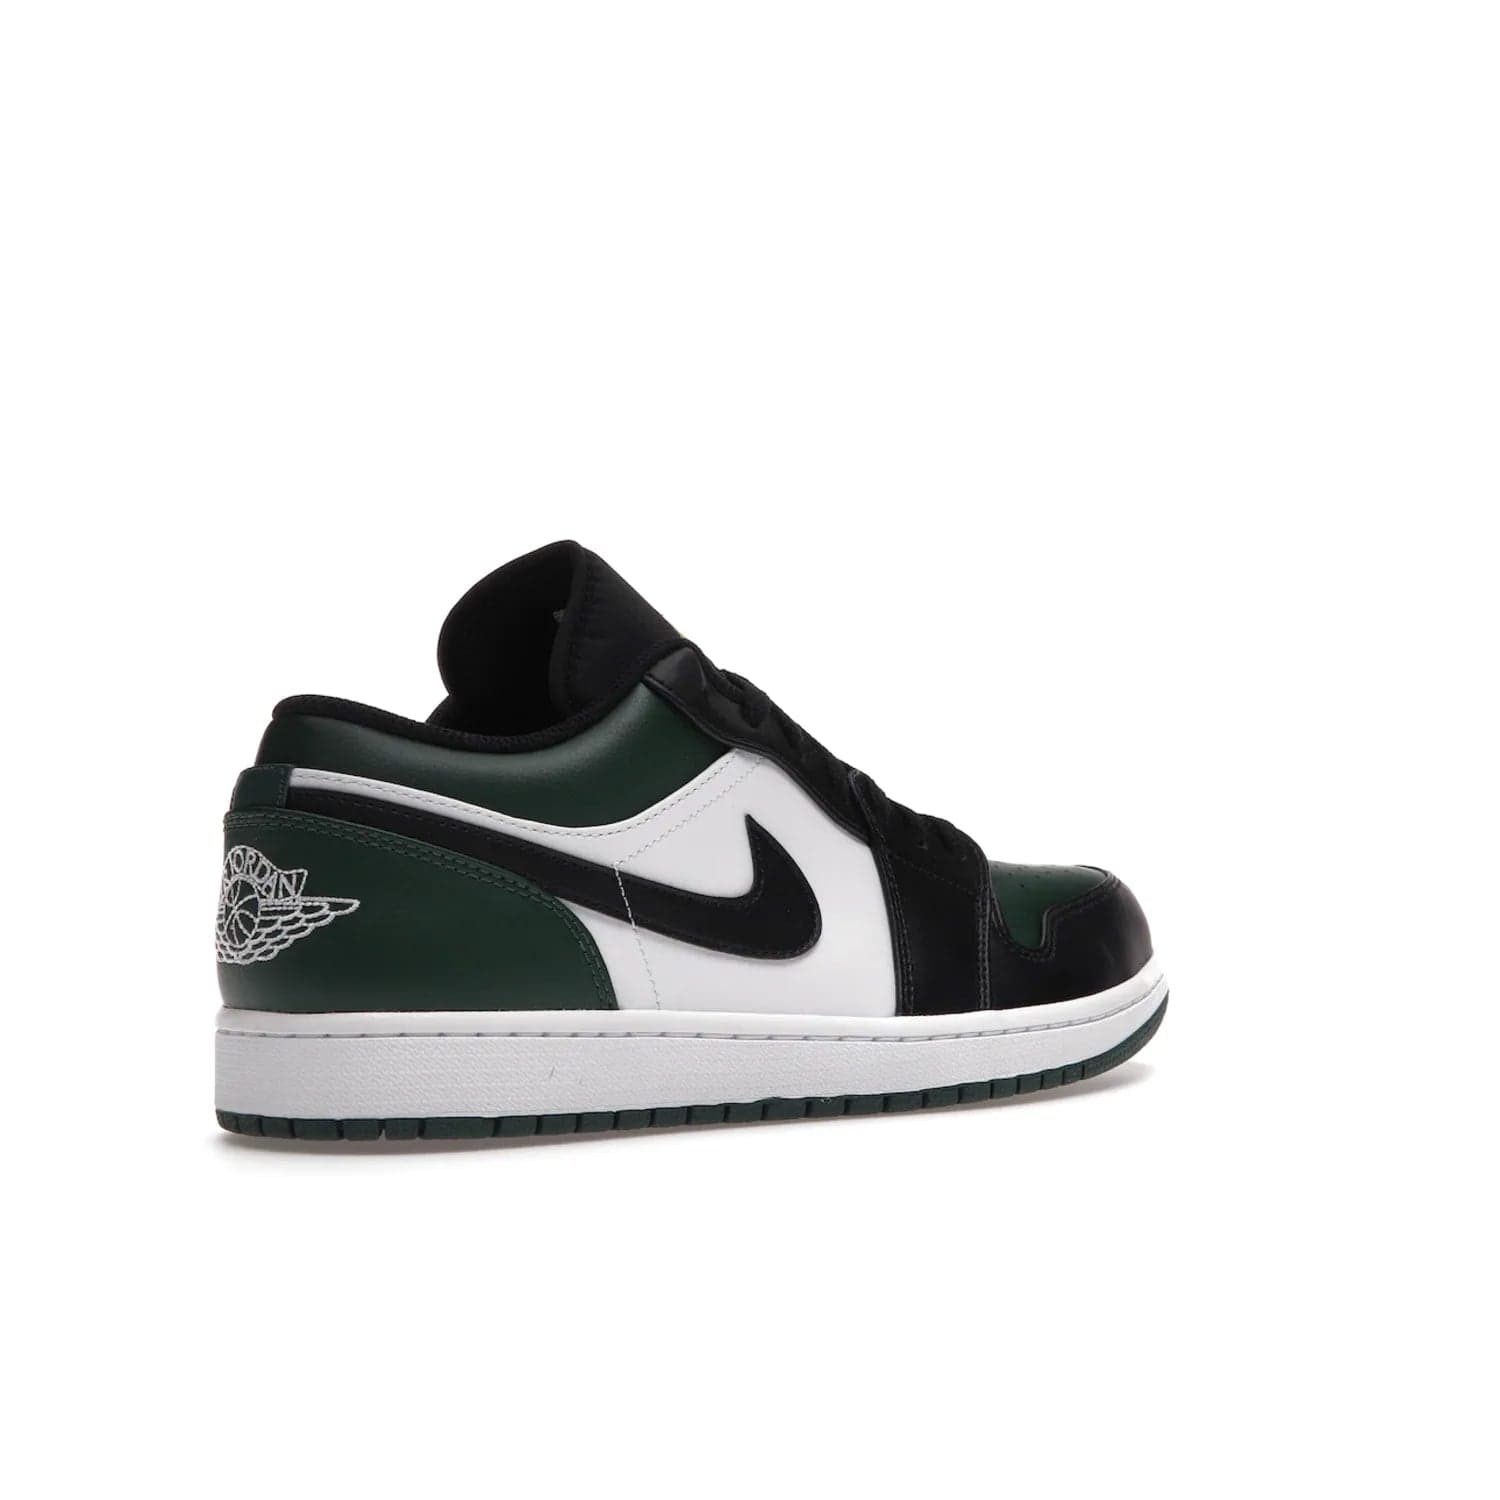 Jordan 1 Low Green Toe - Image 33 - Only at www.BallersClubKickz.com - The Jordan 1 Low Green Toe features white, black and Noble Green leather with black Swoosh. Get the classic Bred Toe-inspired color blocking with green perforated toe box. White and green Air sole completes the design. Released in October 2021 at only $100. Grab your pair now!